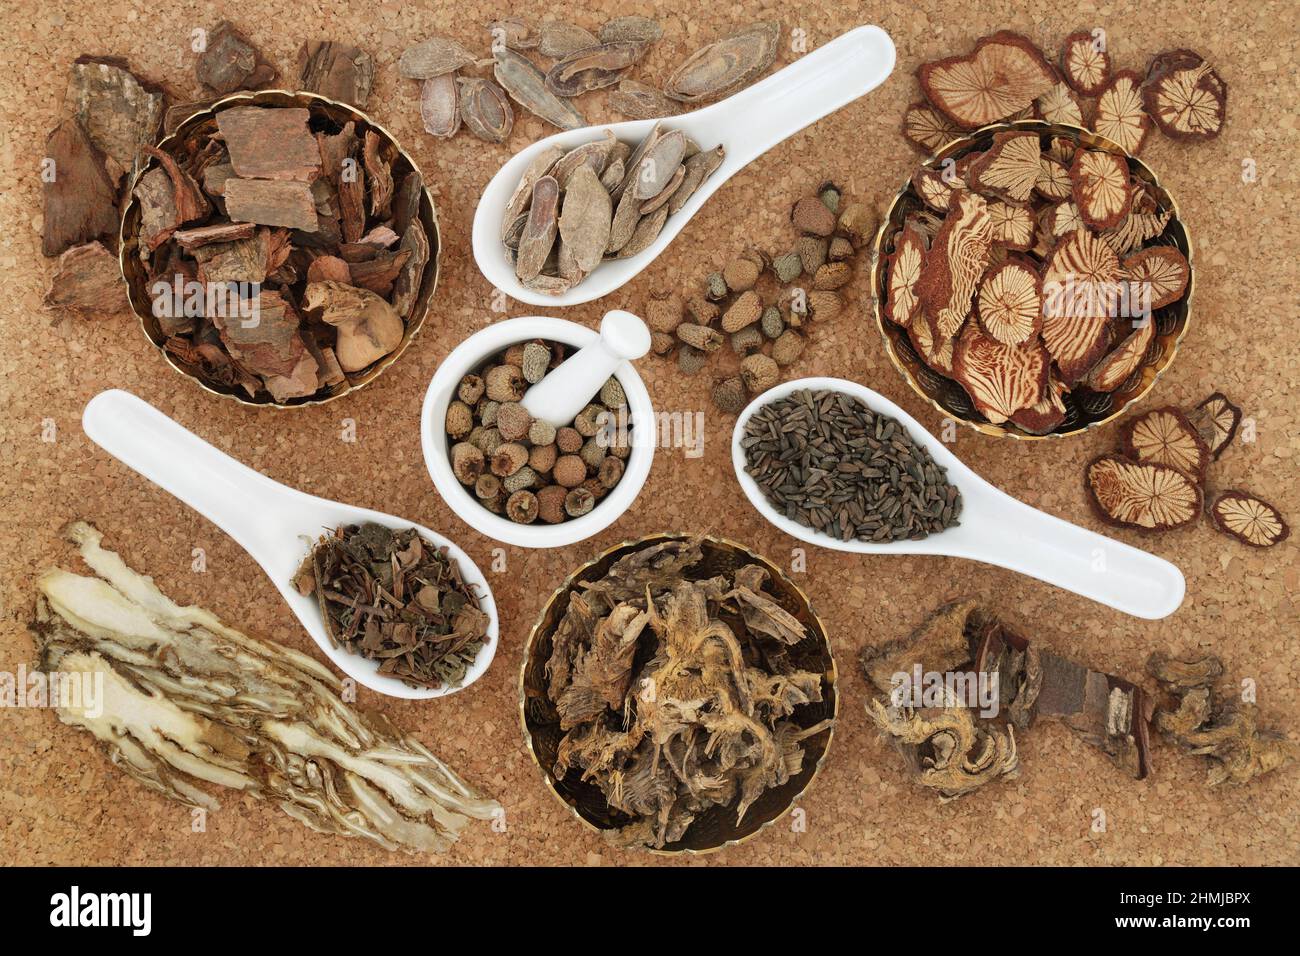 Natural plant based traditional Chinese herbal medicine with herbs and spice for alternative health care. Top view on cork background. Stock Photo